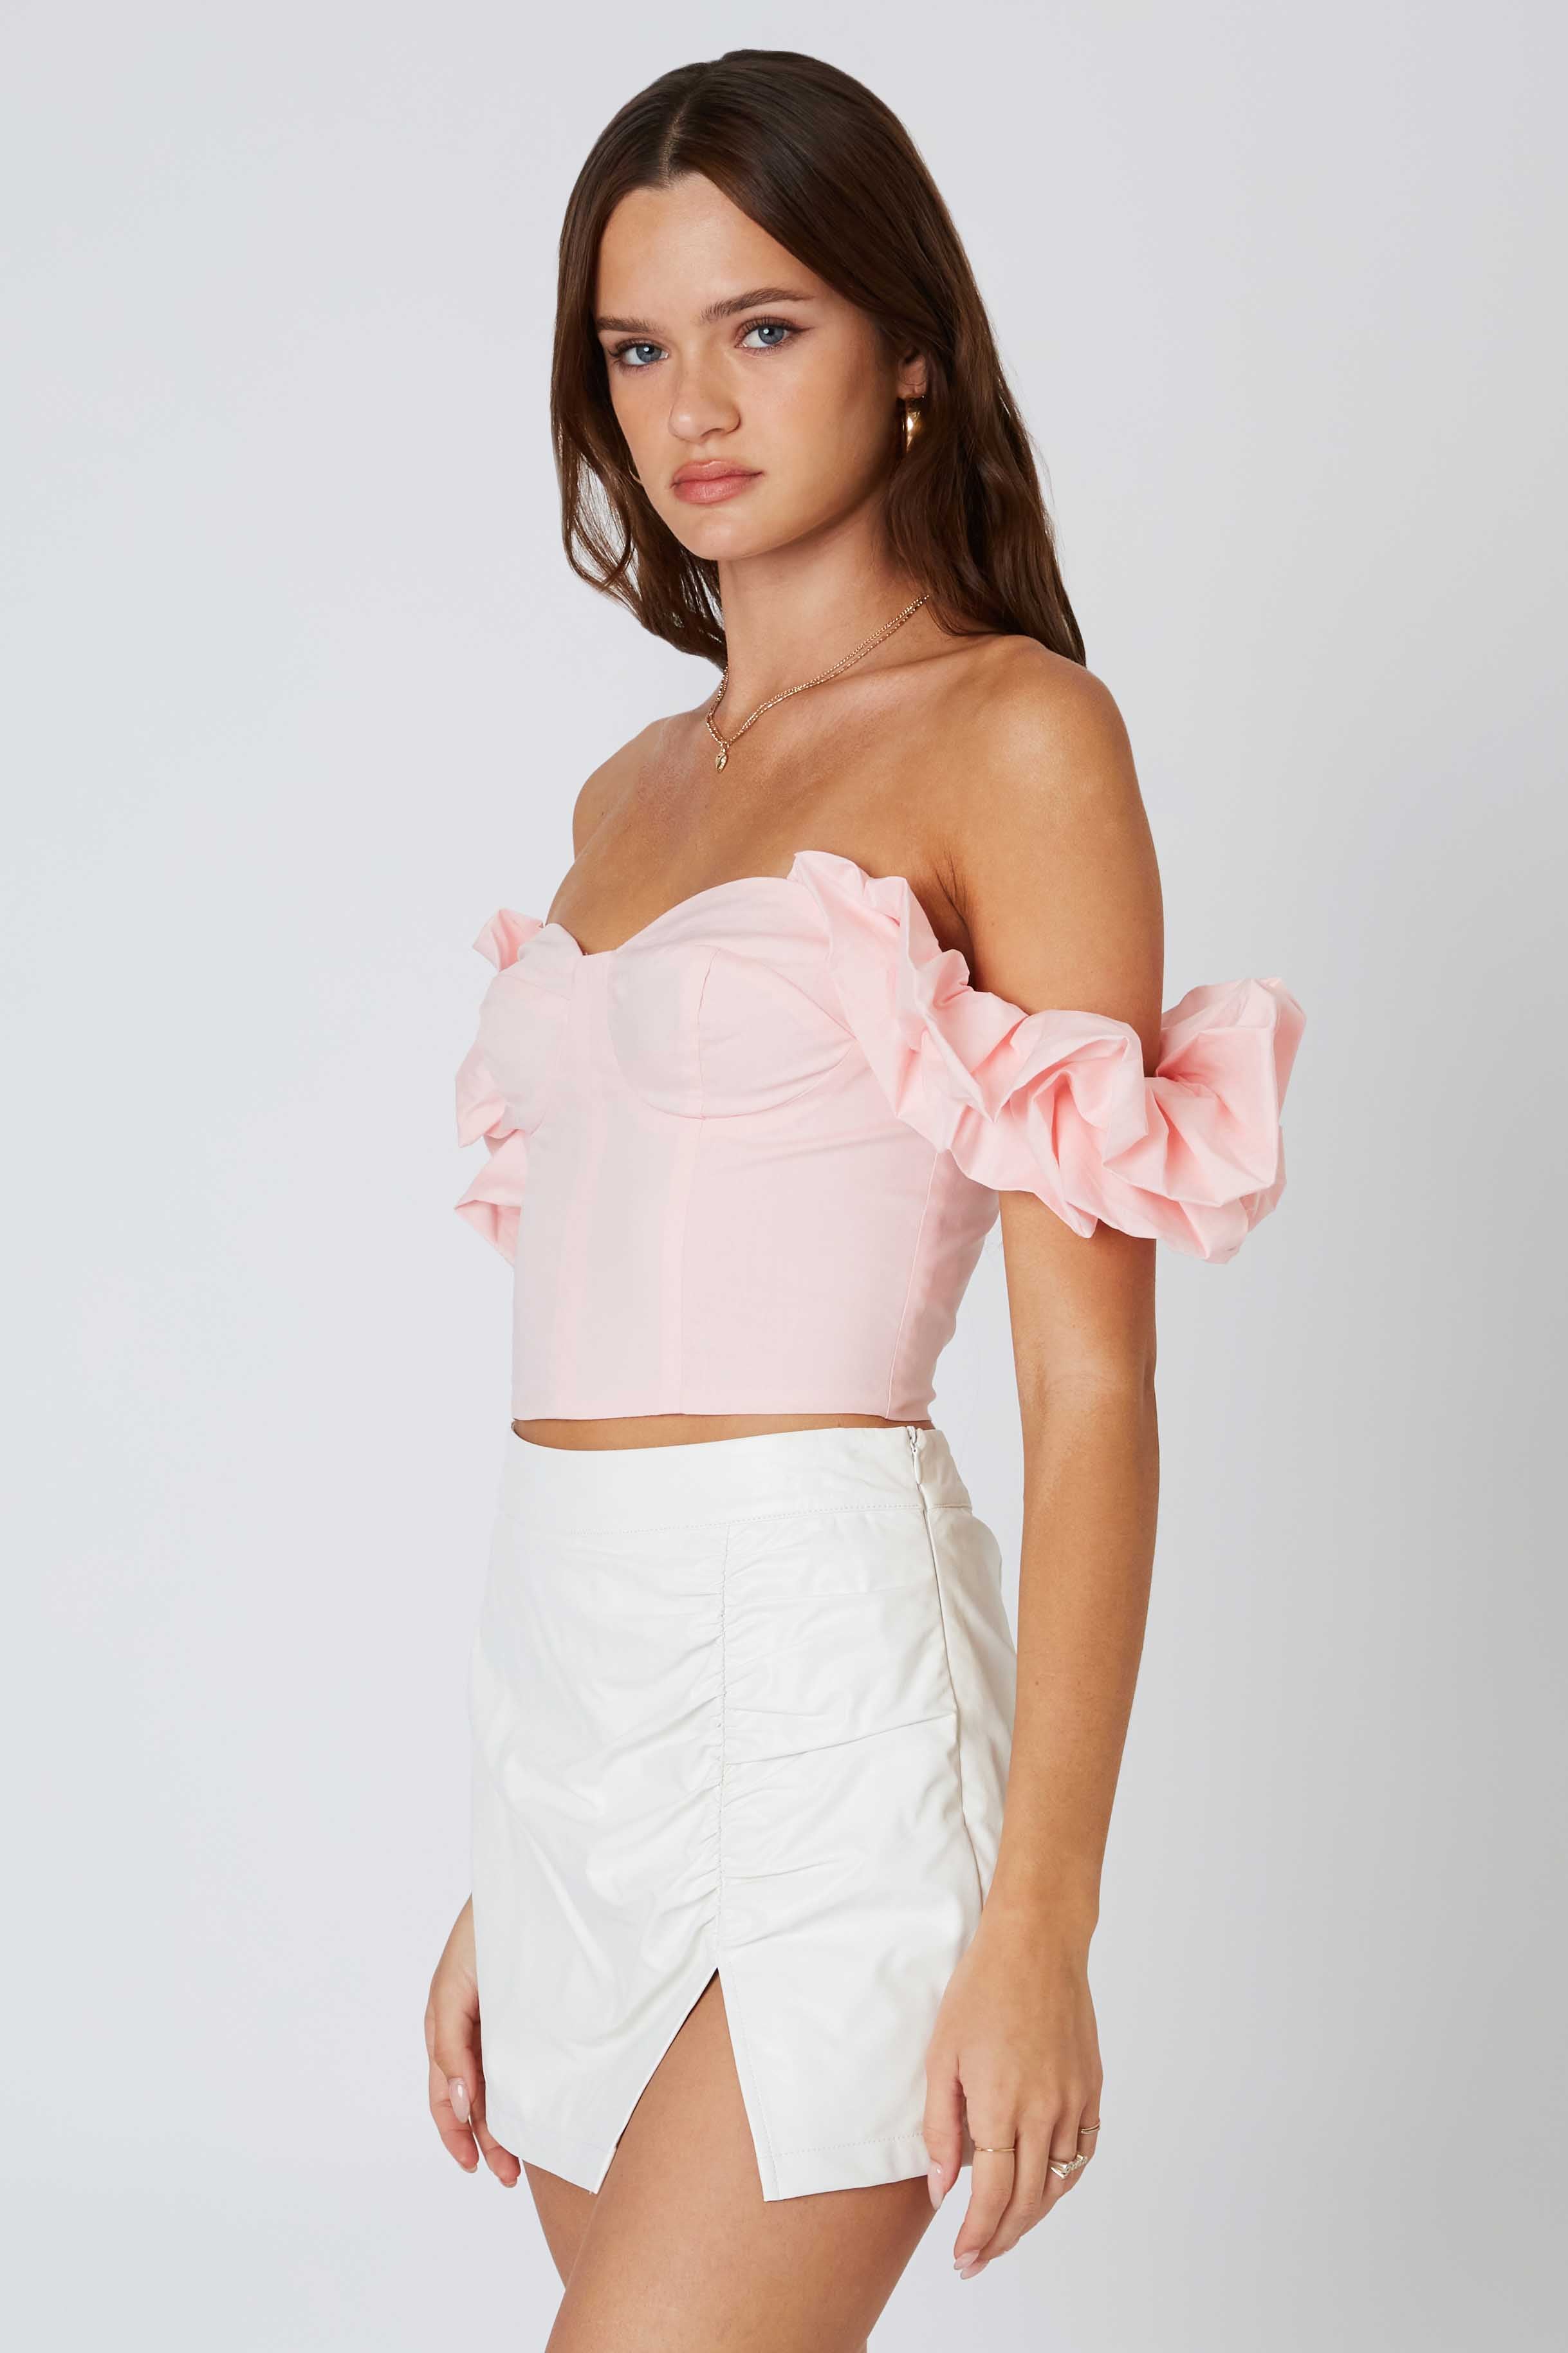 Off-Shoulder Corset in Blush Side View